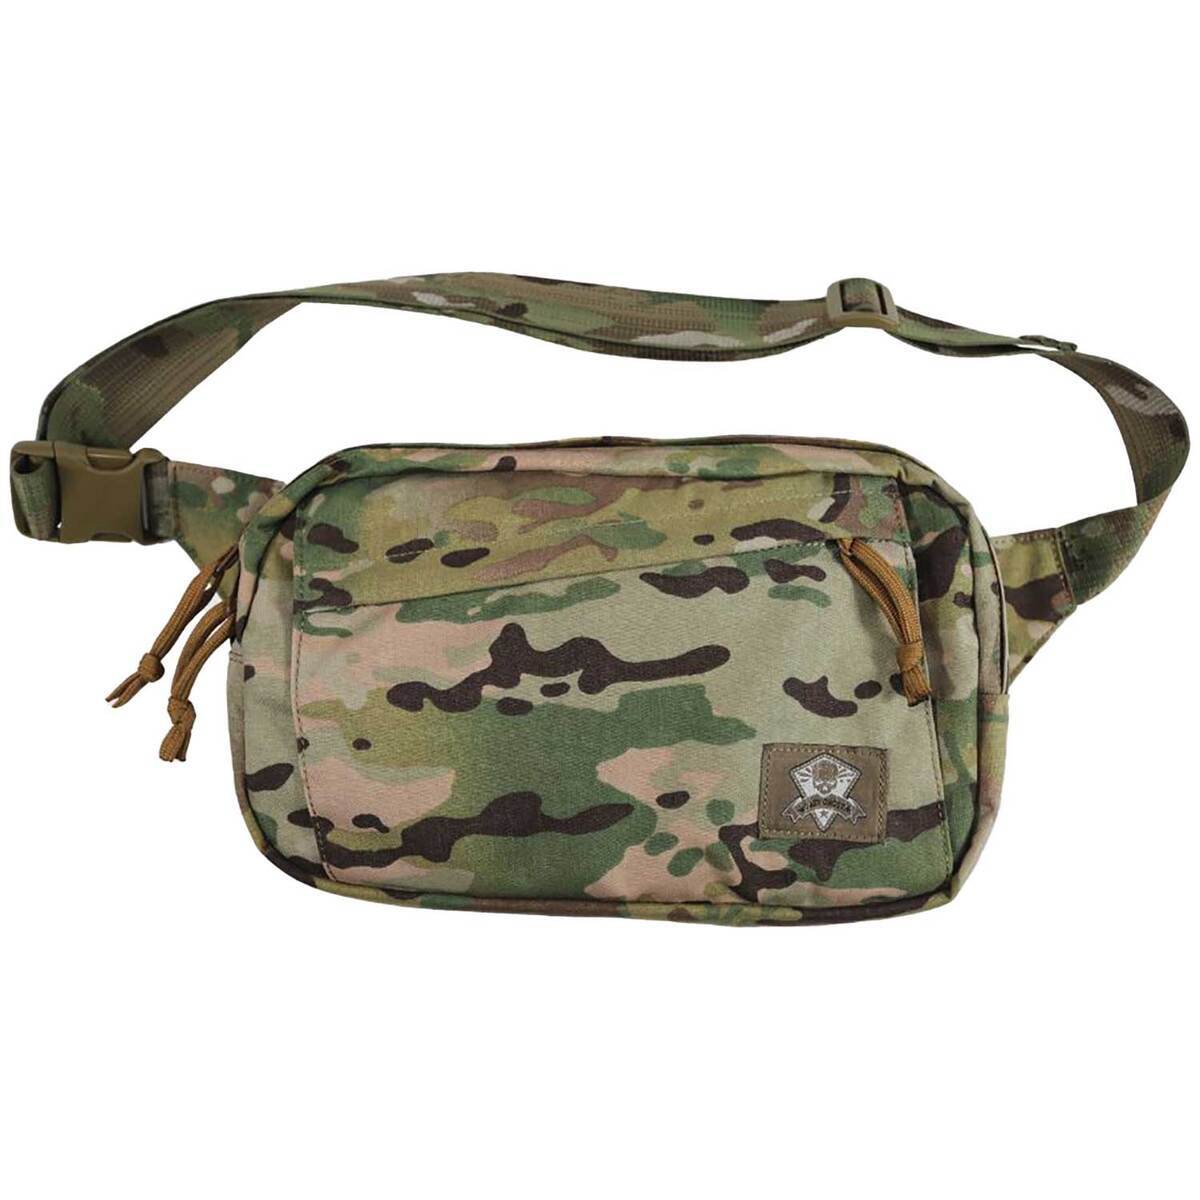 Grey Ghost Gear Concealed Carry Crossbody Bag | Sportsman's Warehouse